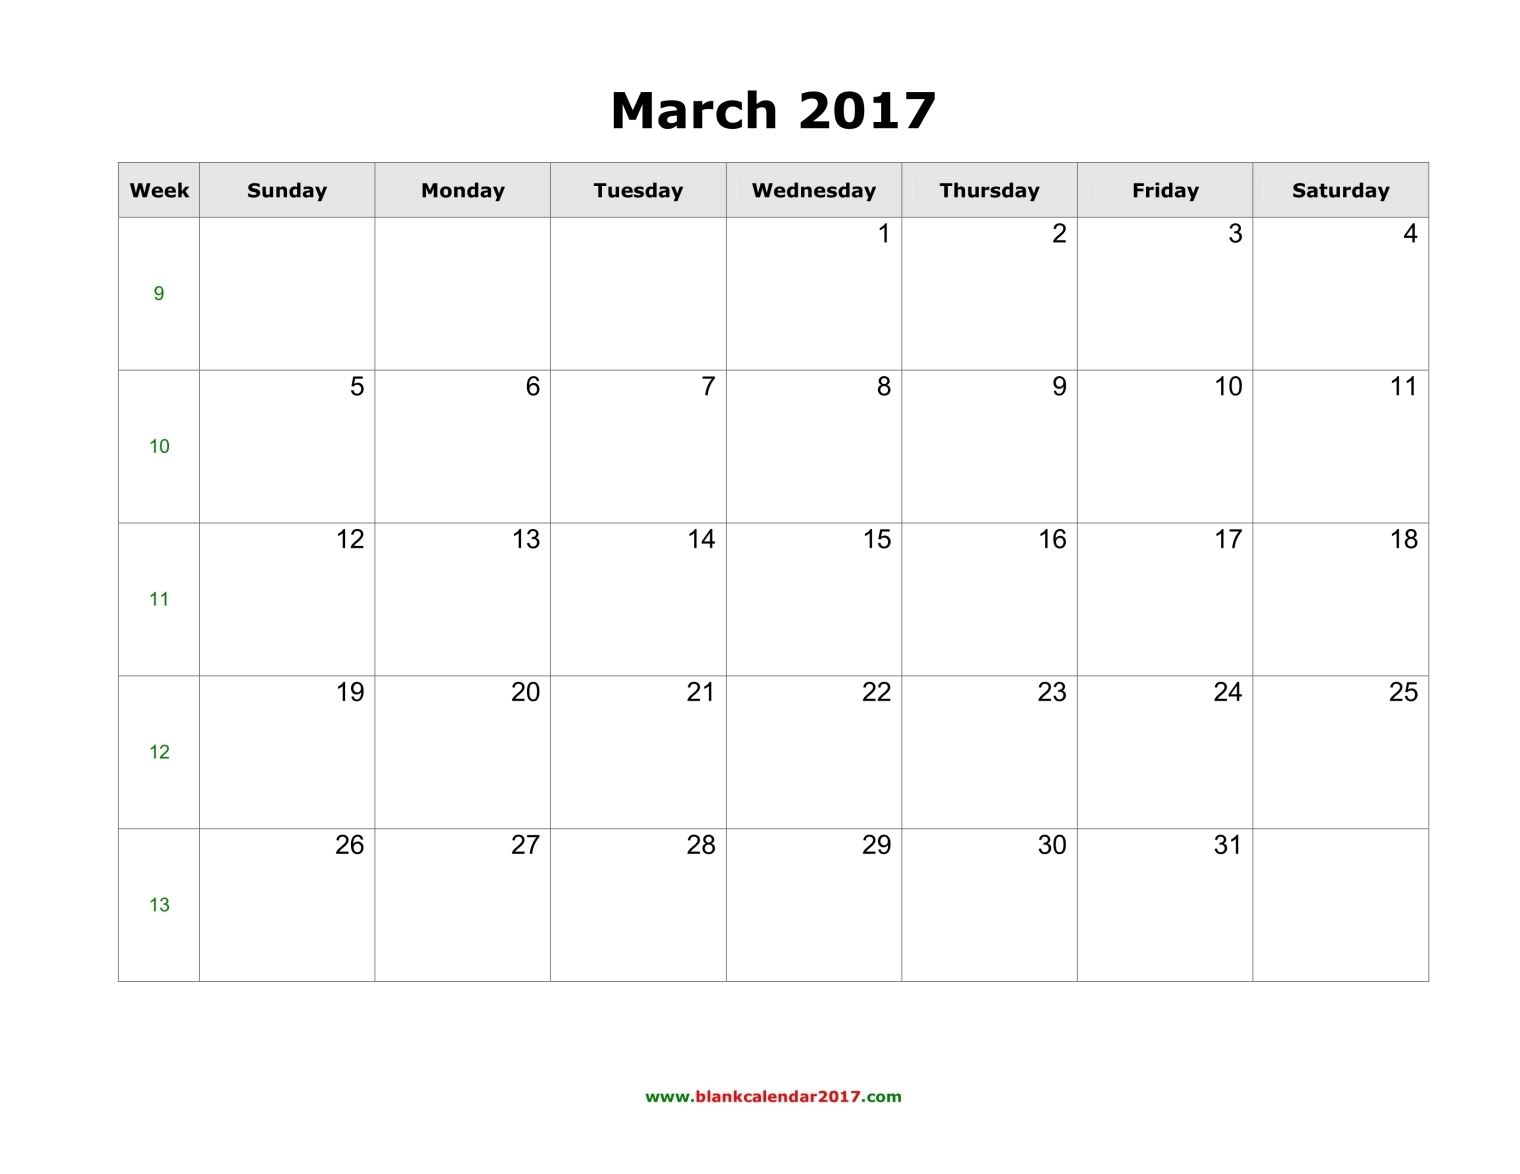 March 2017 Calendars for Word, Excel & PDF